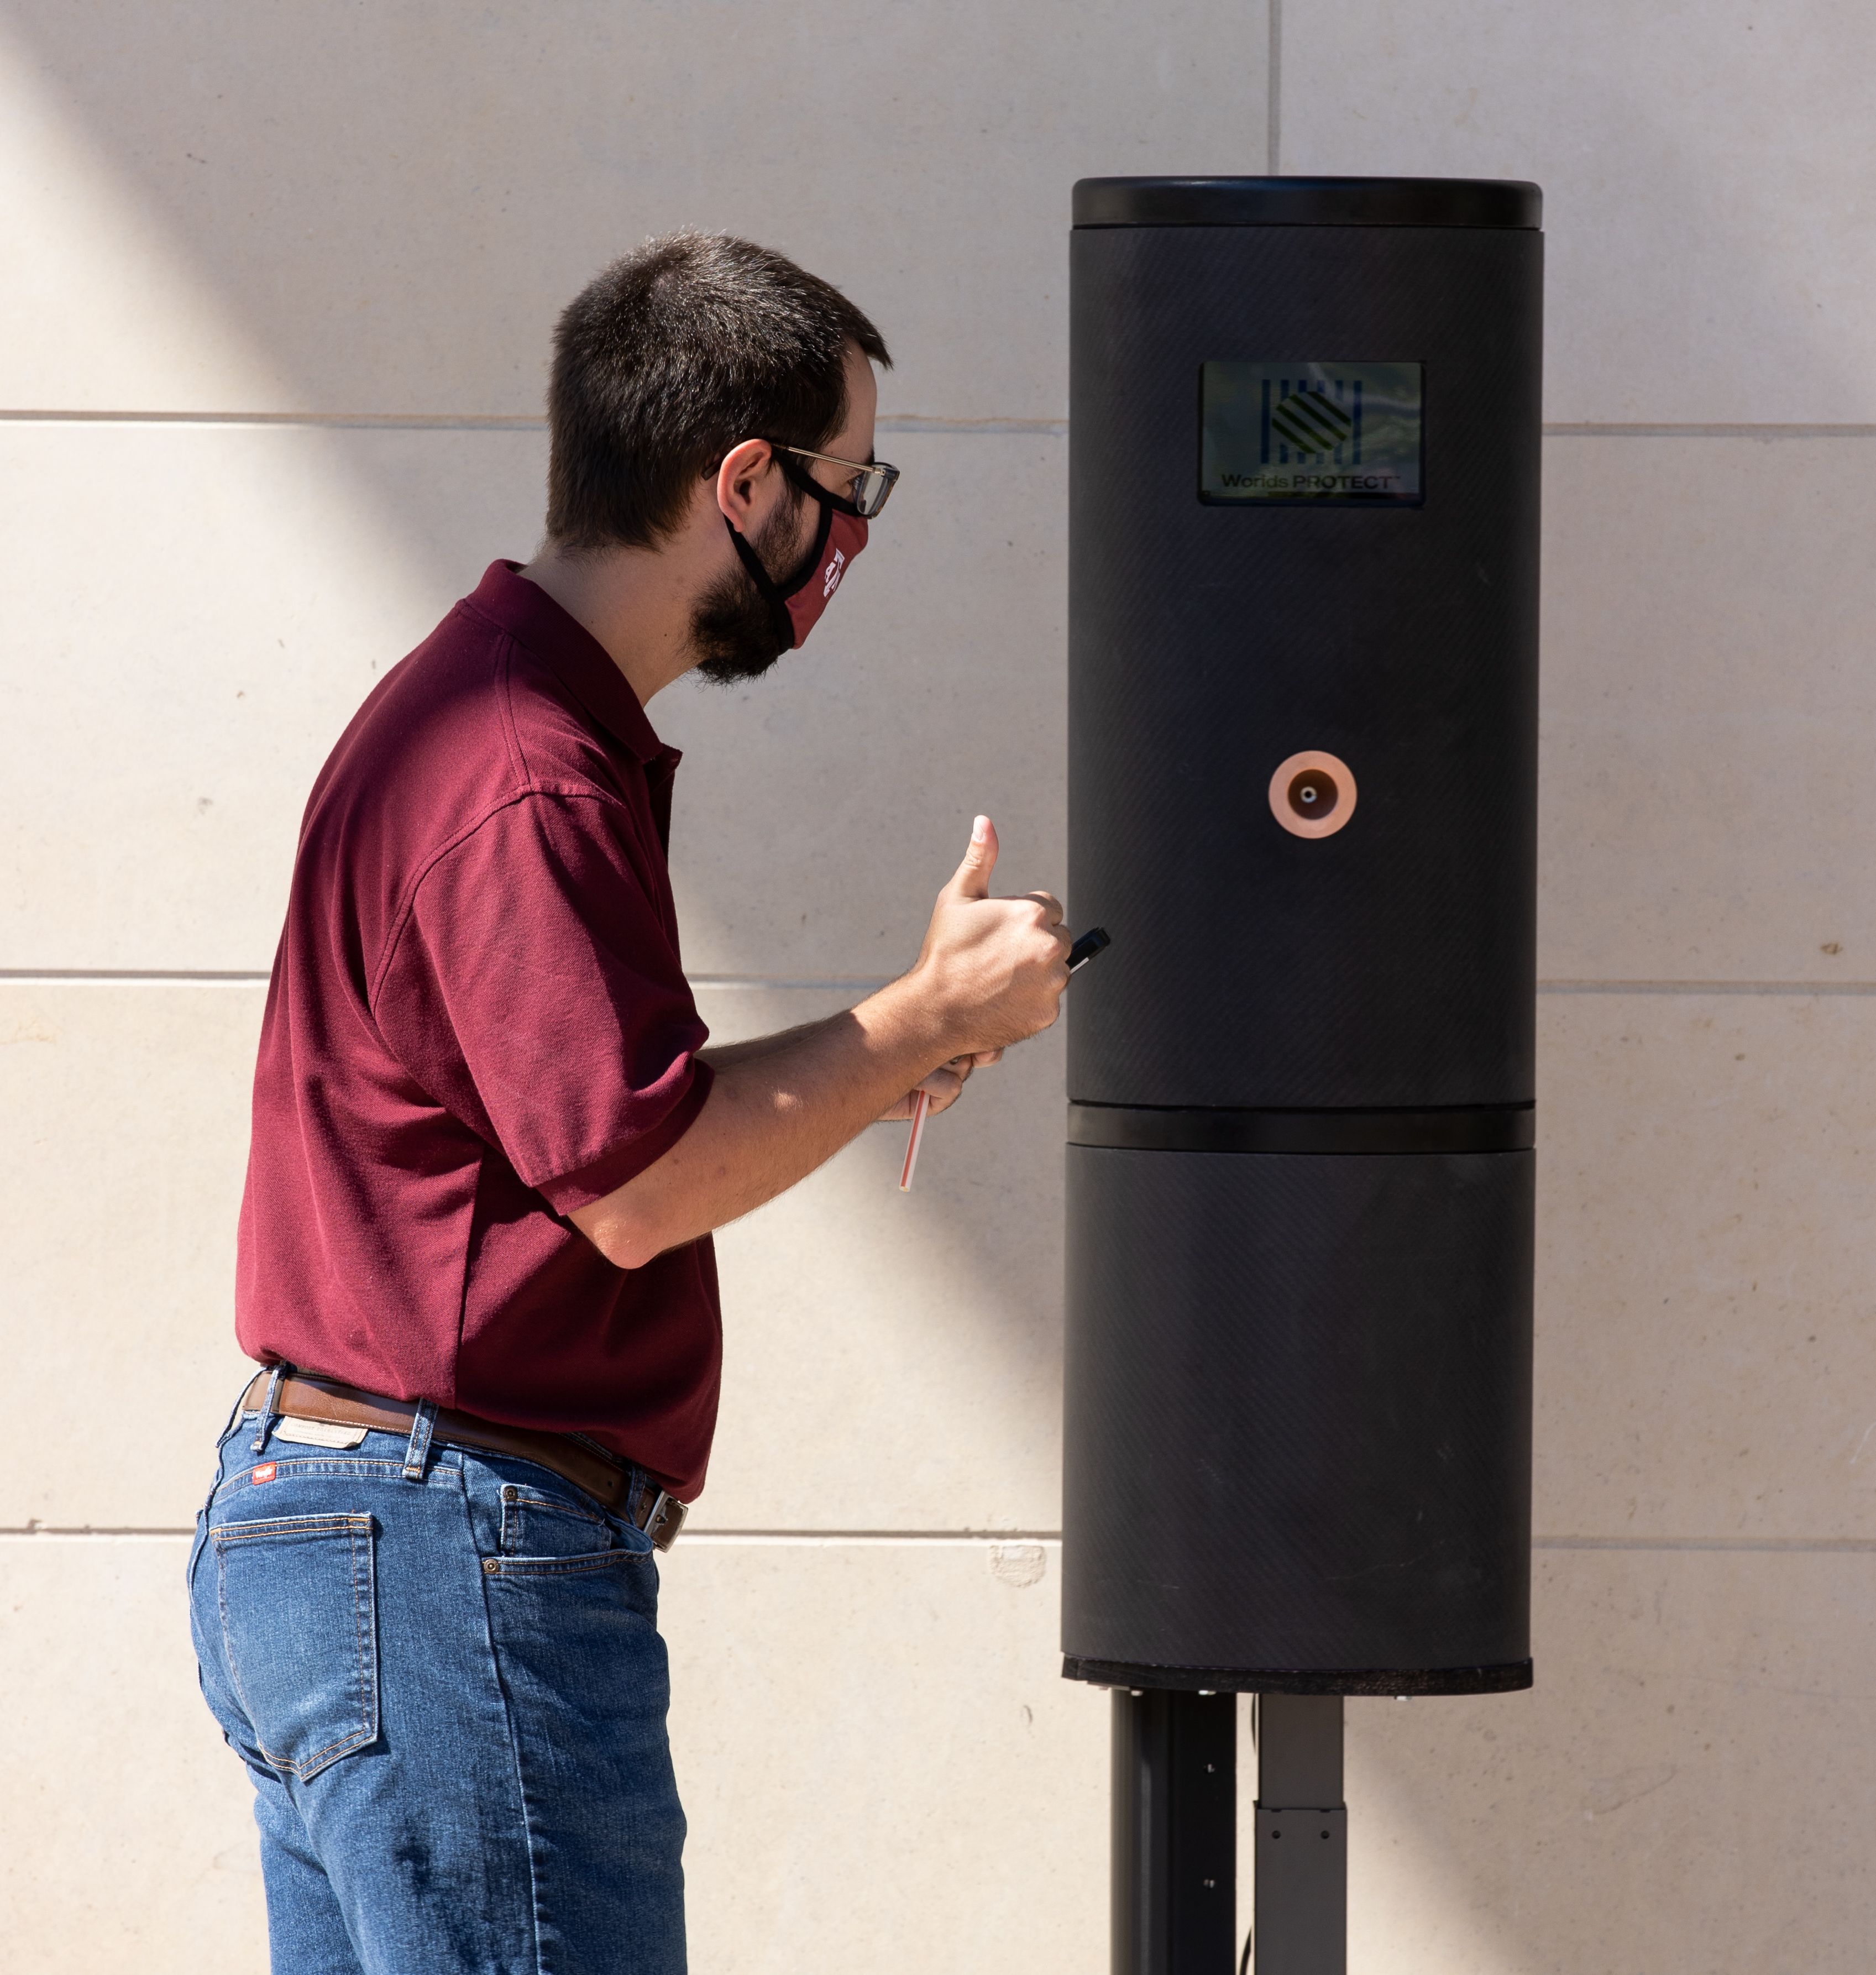 A man wearing glasses, a face mask, a maroon shirt and jeans inspects a new COVID-19 breathalyzer kiosk.